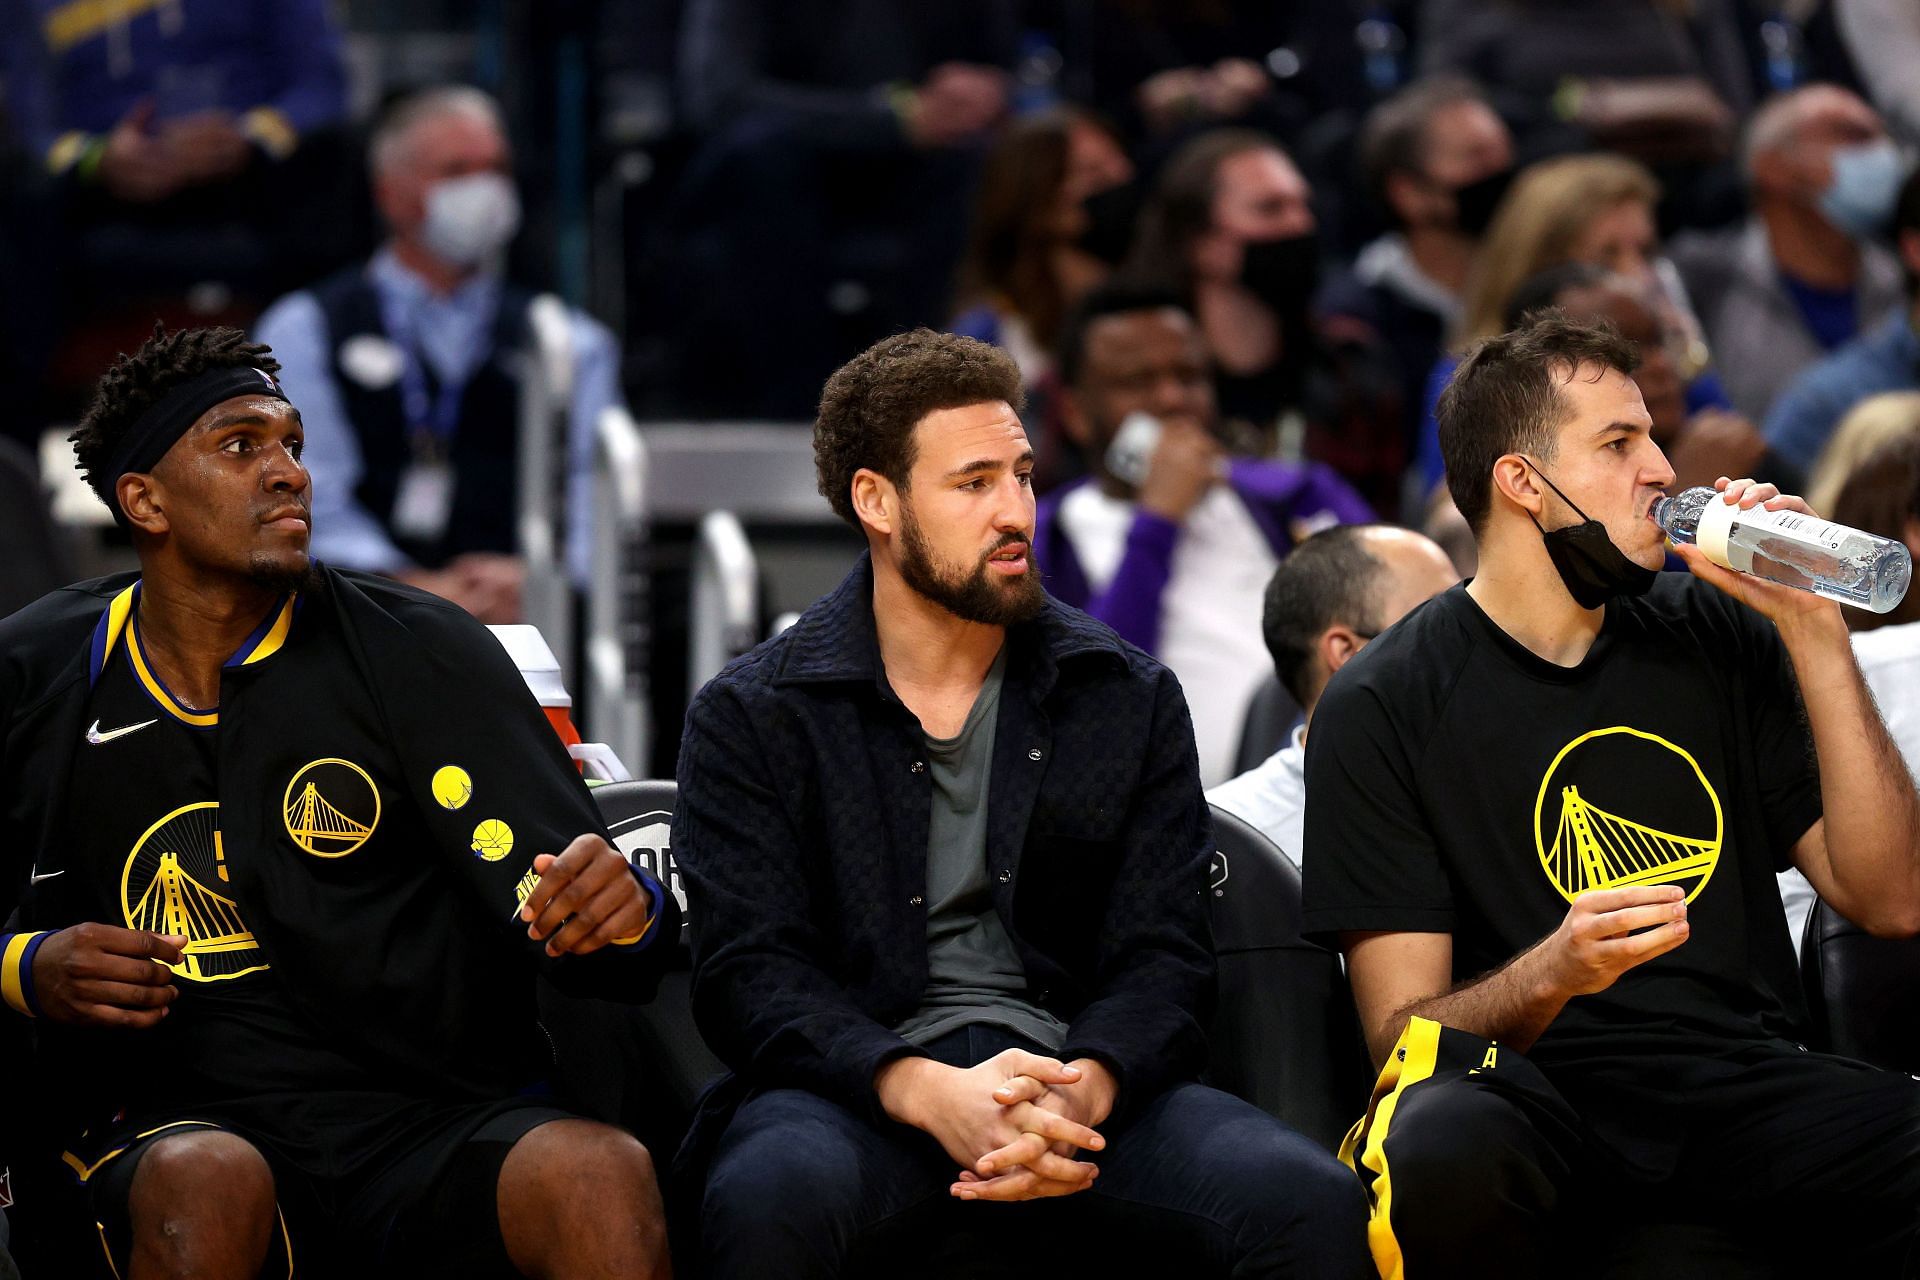 Golden State Warriors Klay Thompson on the bench (in the middle)